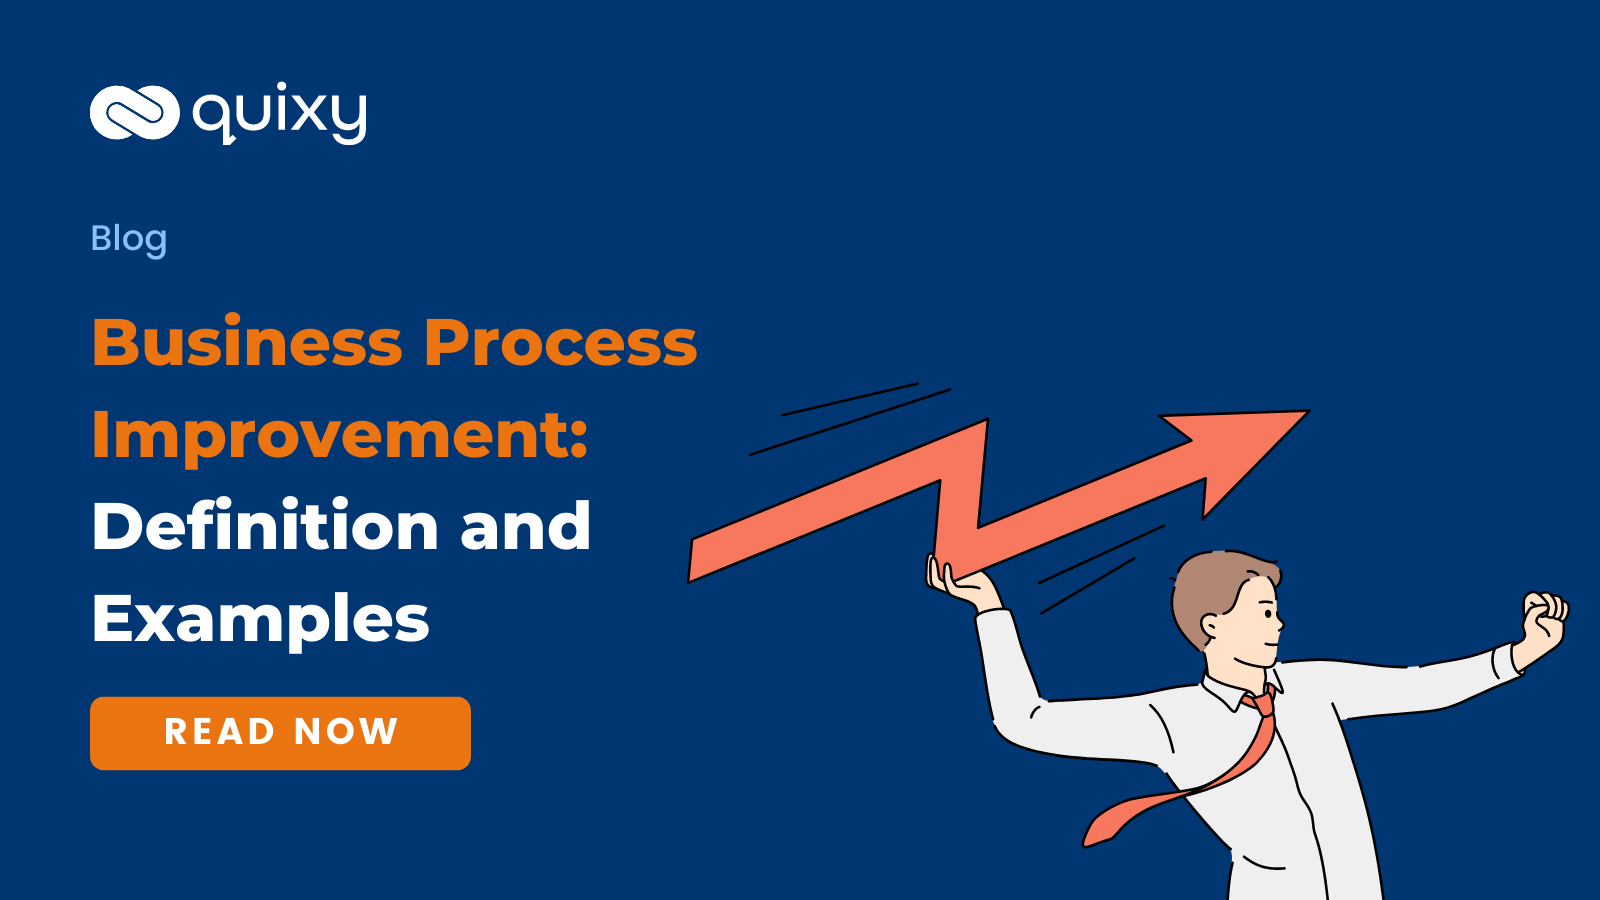 Business Process Improvement: Definition and 5 Examples